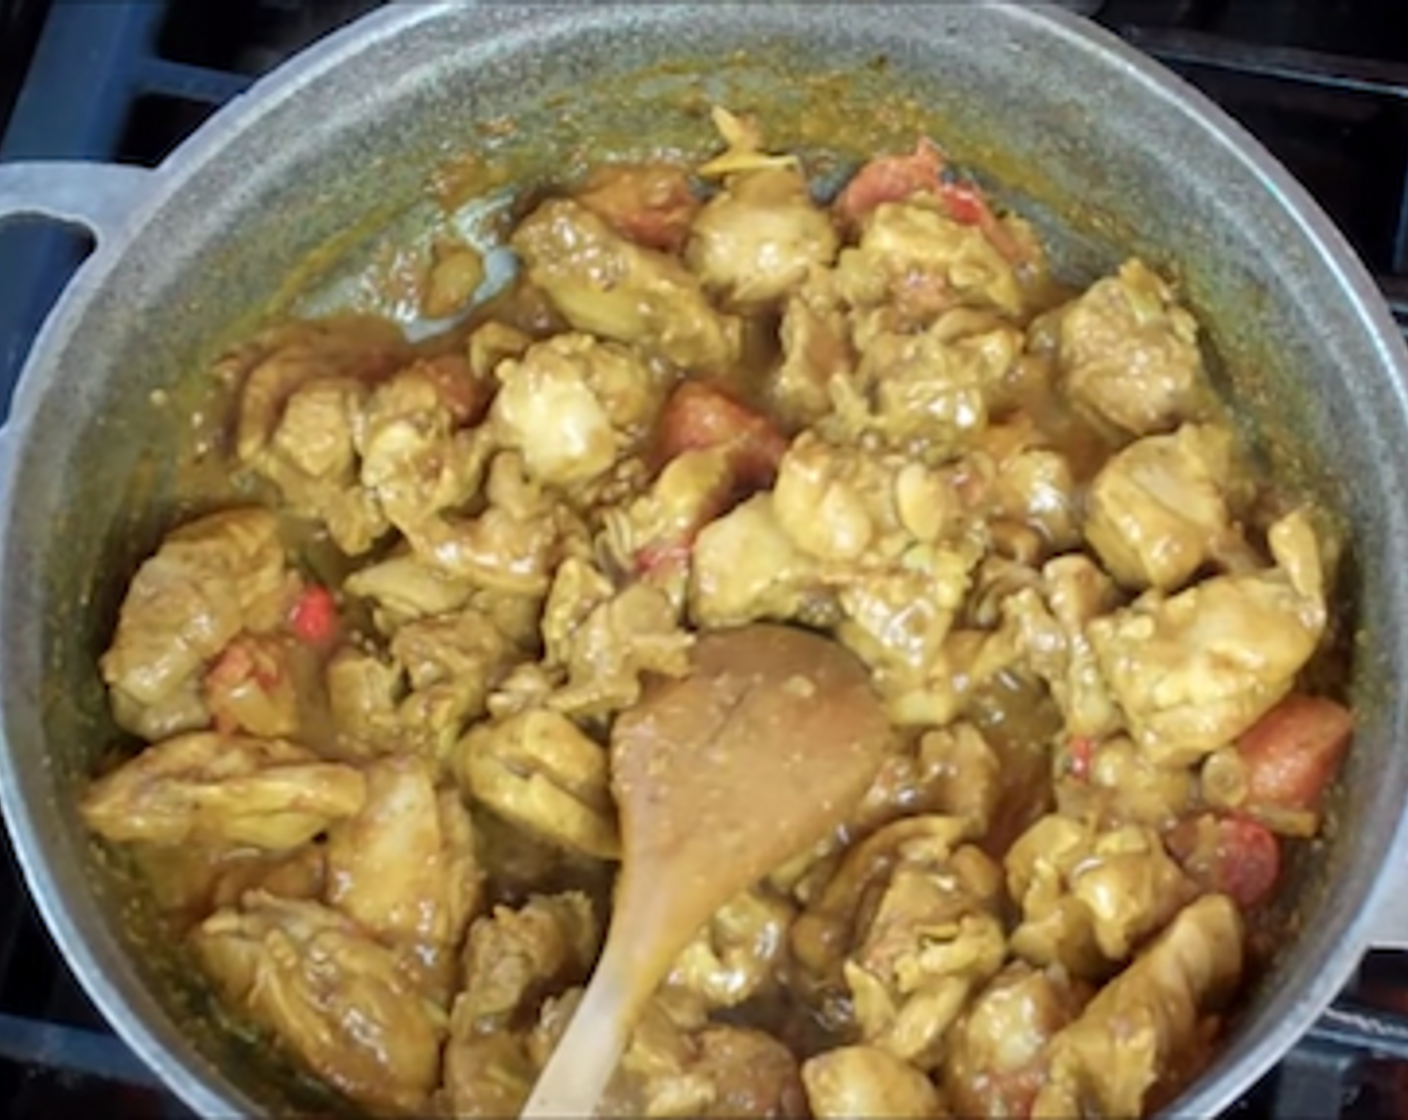 step 6 Turn up the heat to burn off all liquid which sprouted naturally – about 3 minutes. Try to get back to the oil you started off with – it will infuse the chicken with the curry flavor.